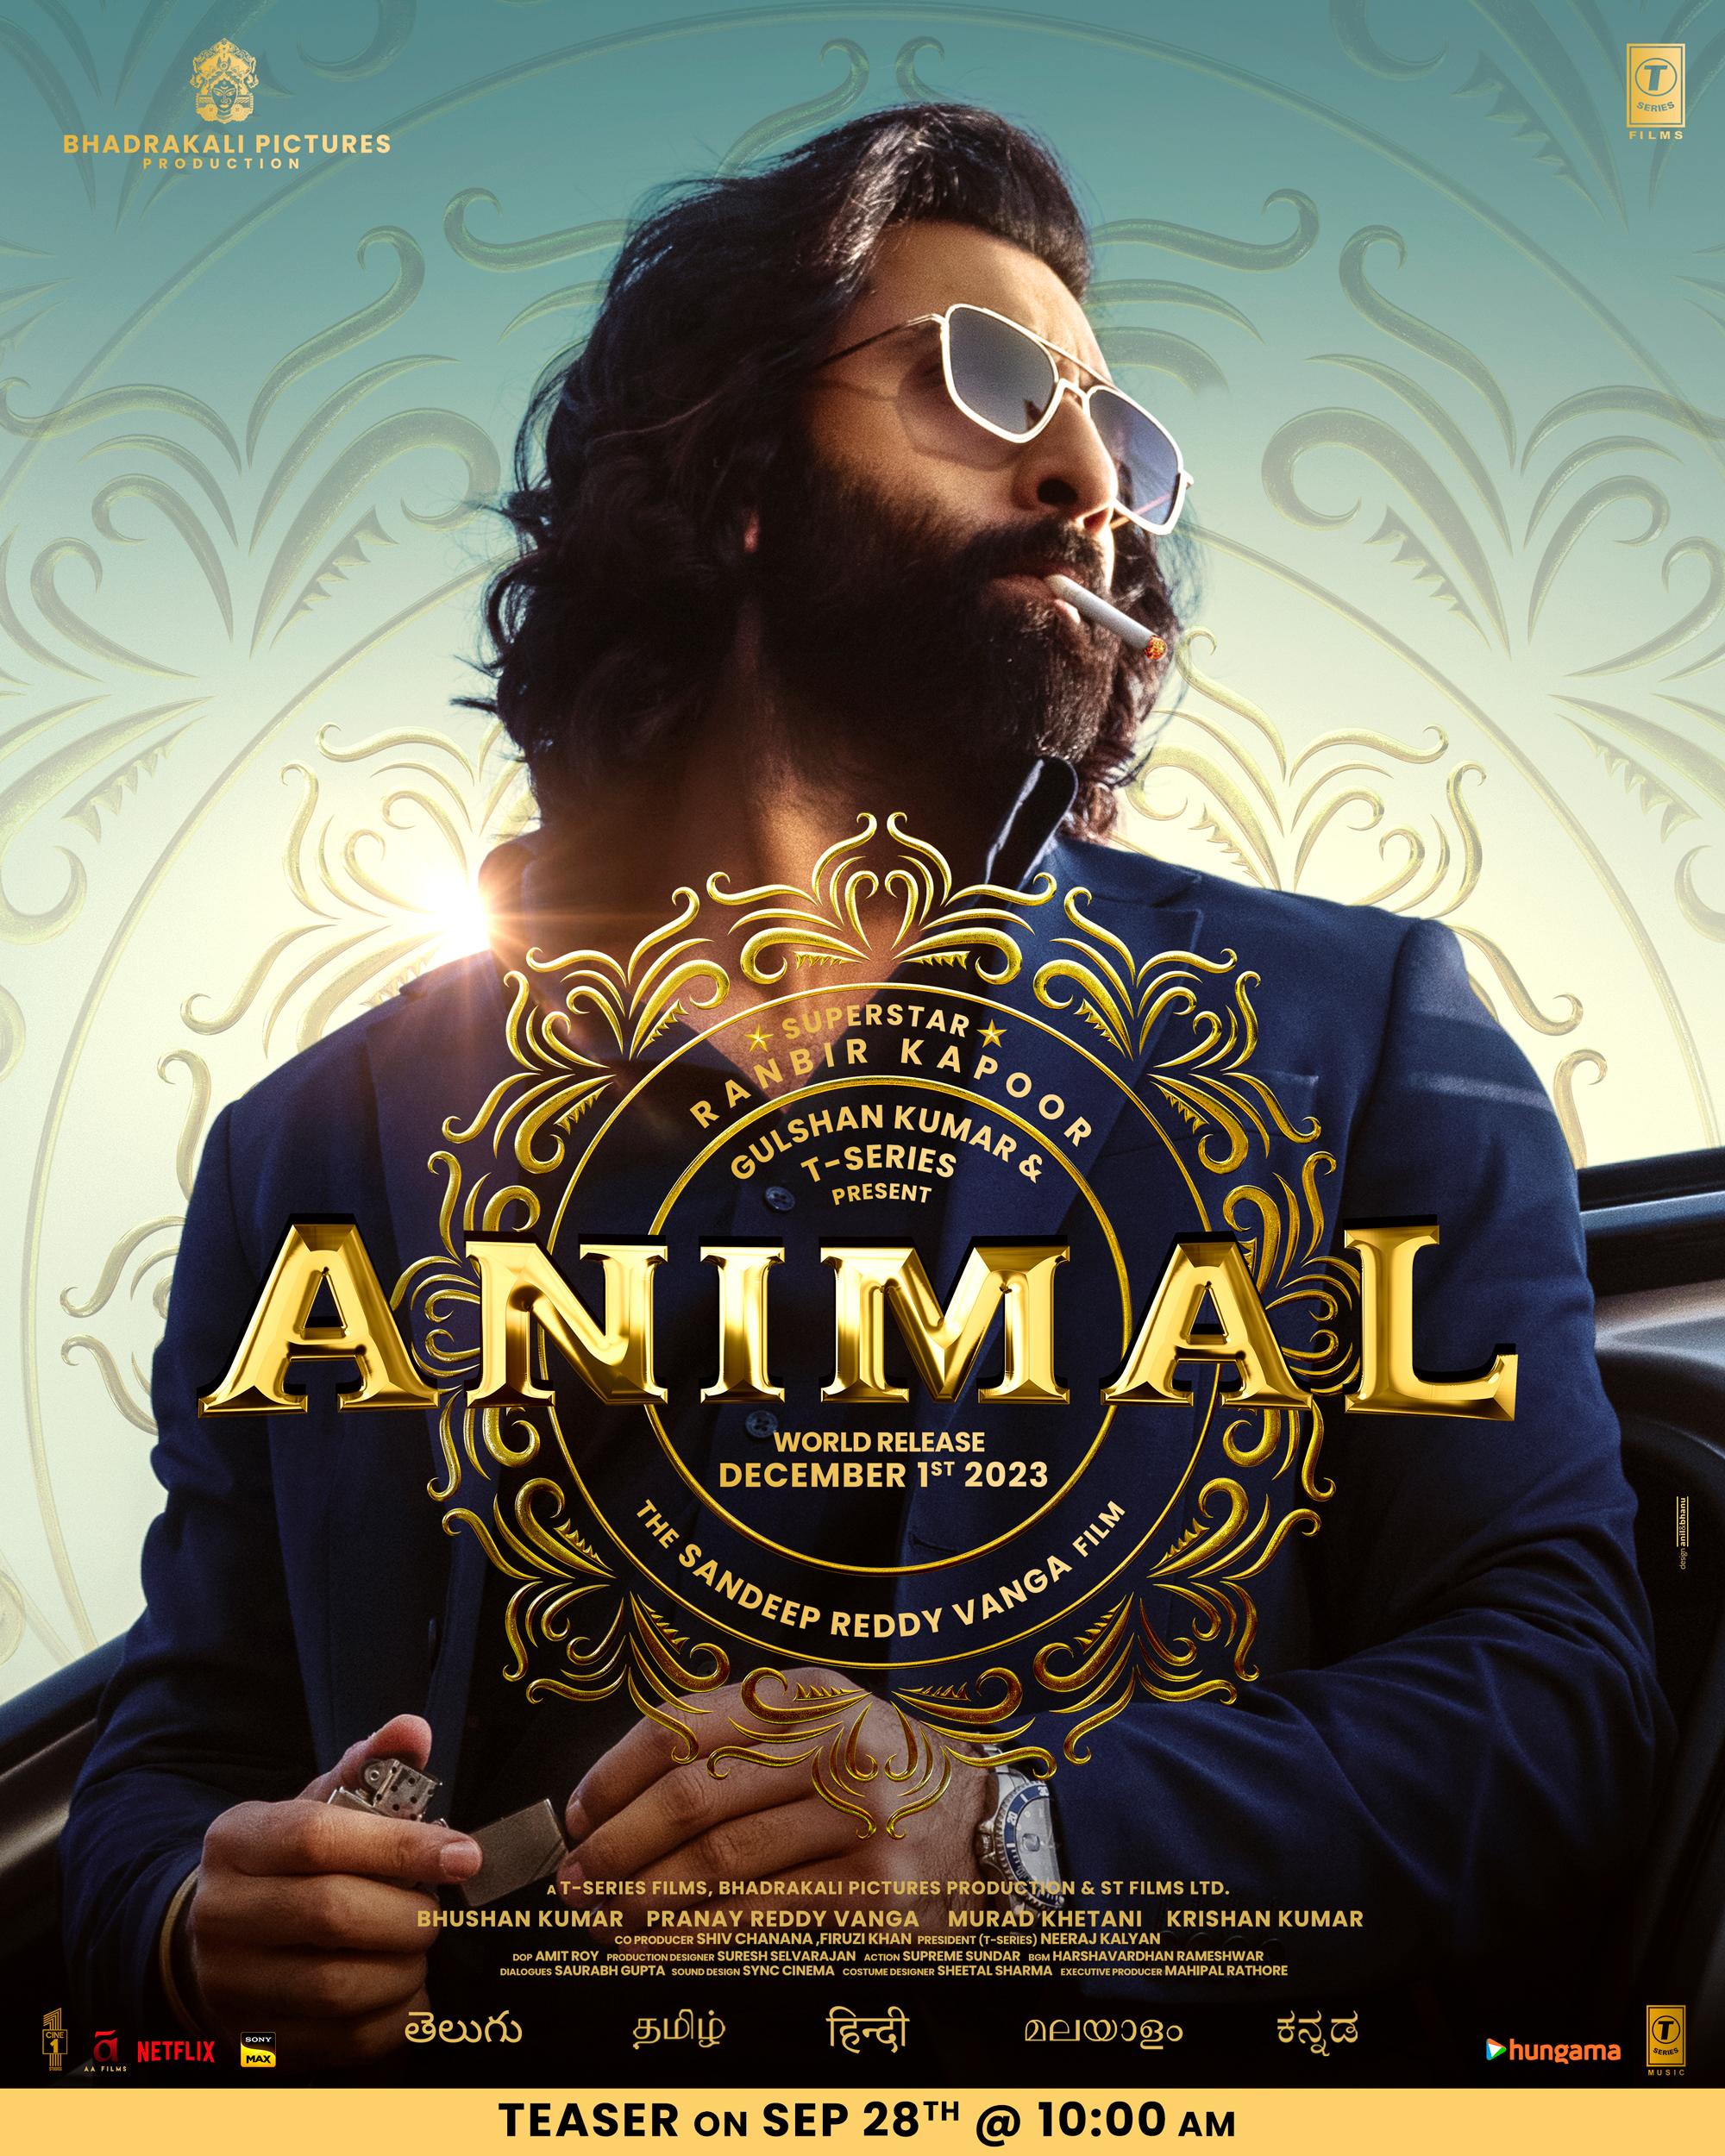 Animal (January 26) - Streaming on NetflixAnimal' was released on December 1 in theatres. The film directed by Sandeep Reddy Vanga stars Ranbir Kapoor, Anil Kapoor, Rashmika Mandanna, Bobby Deol, and Triptii Dimri among others. It will premiere on Netflix at midnight.